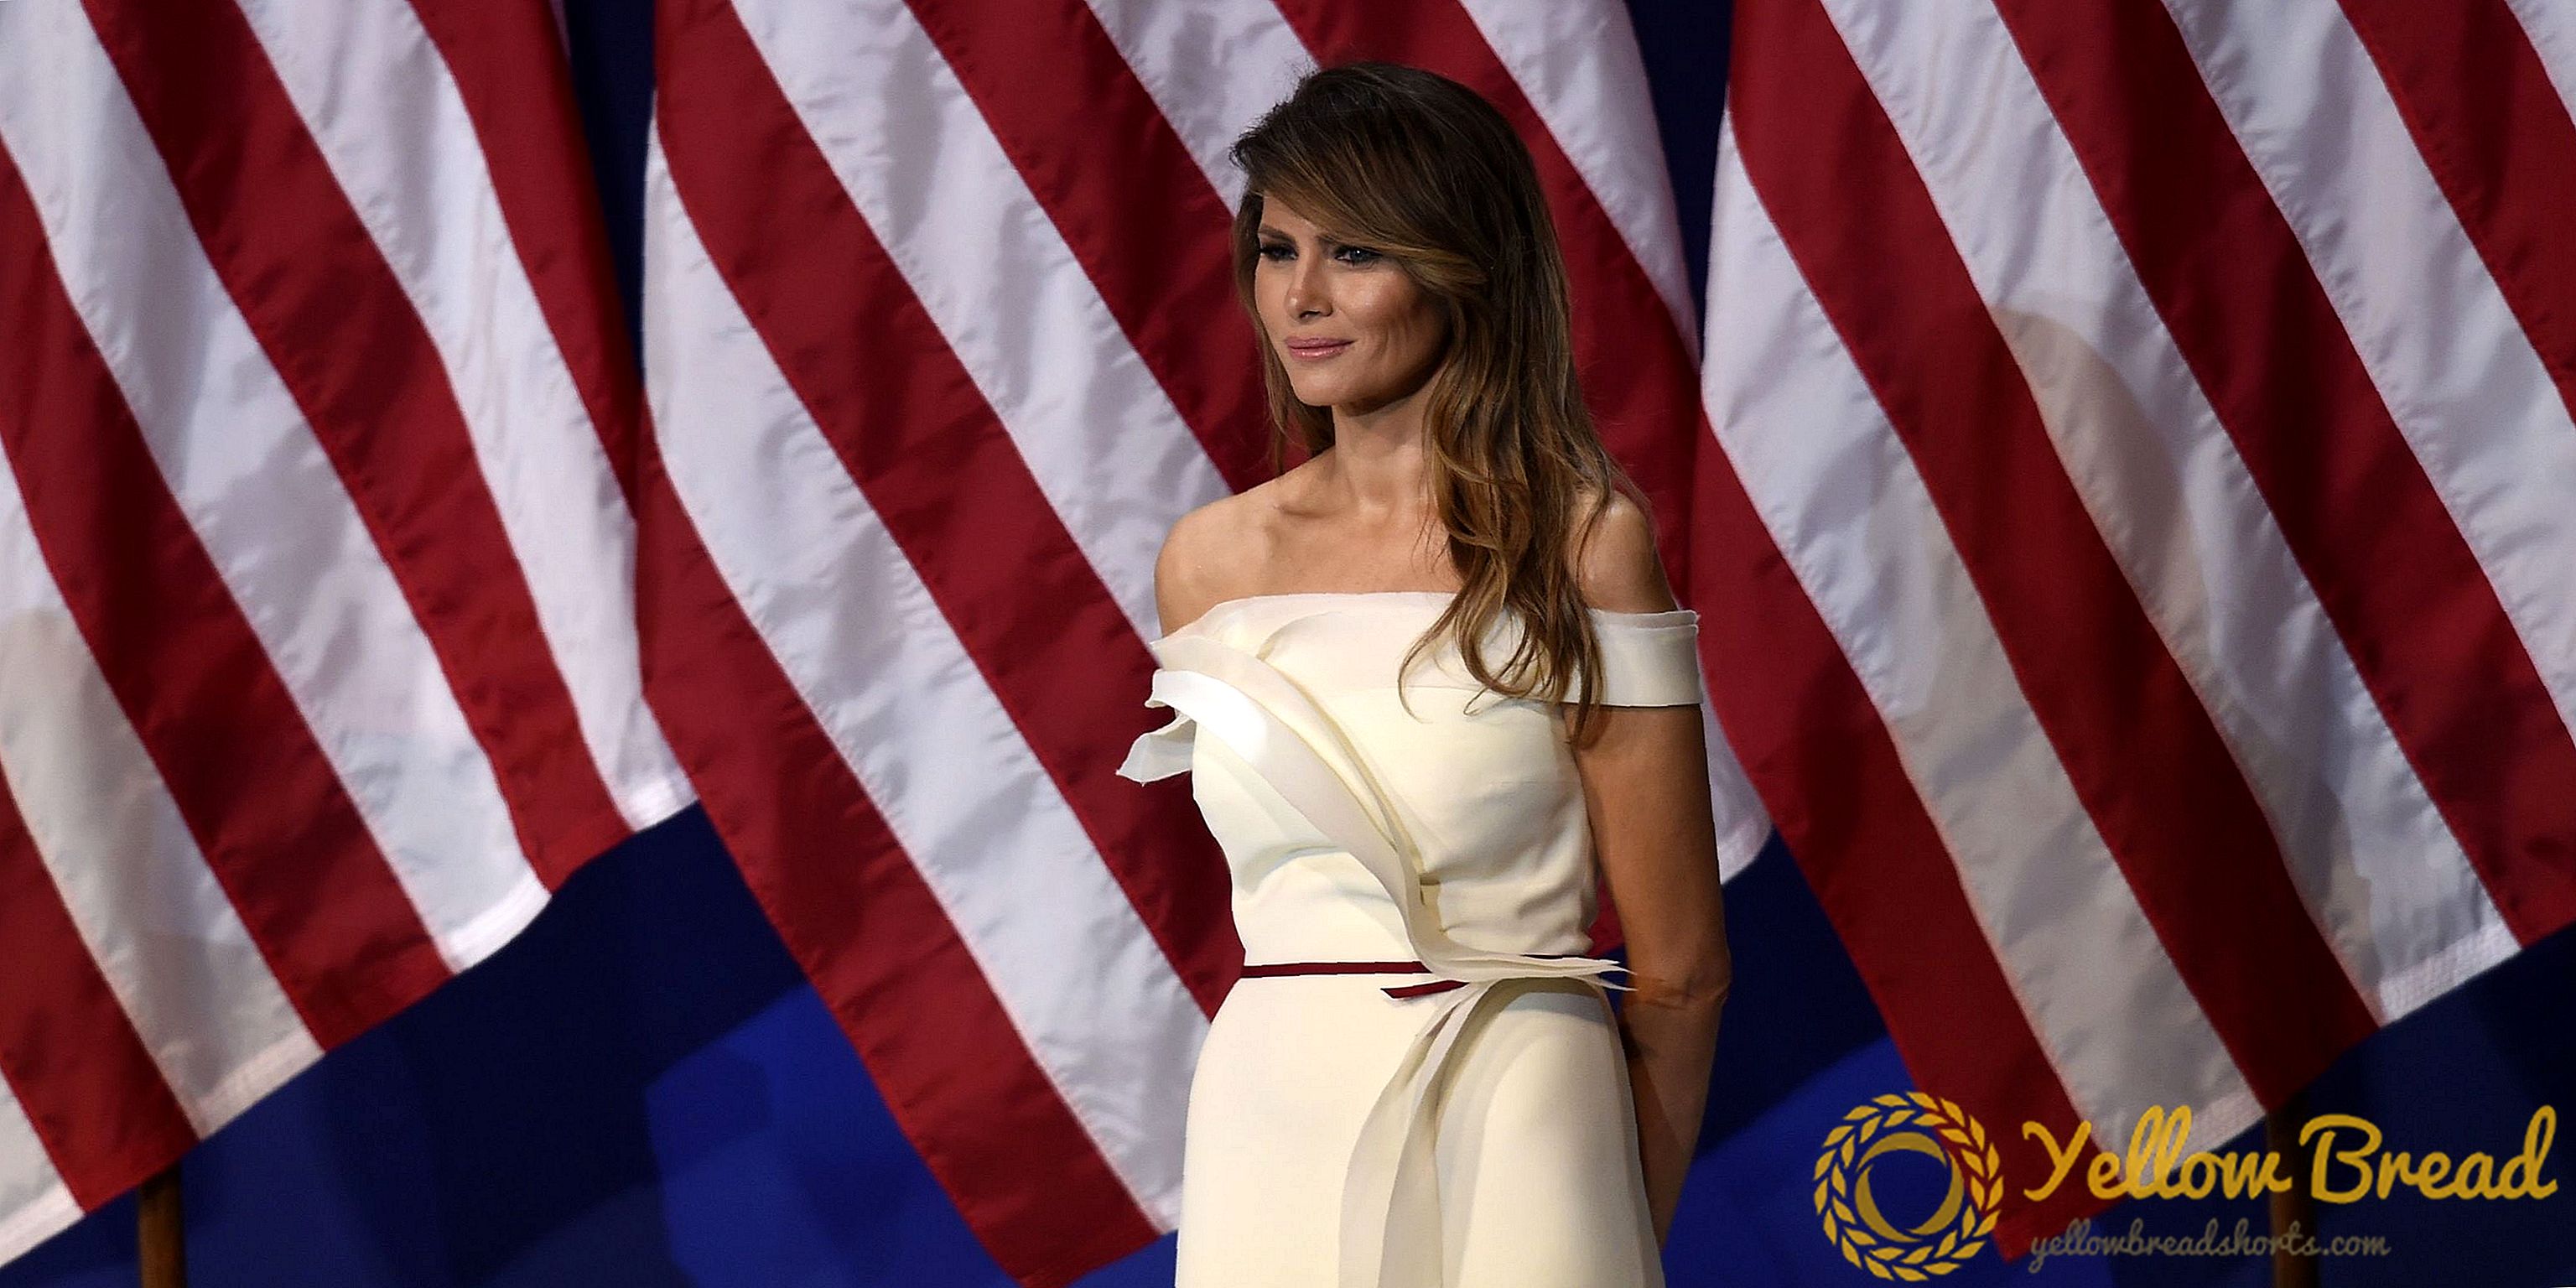 Melania Trump Has Hired An Interior Designer To Redecorate The White House